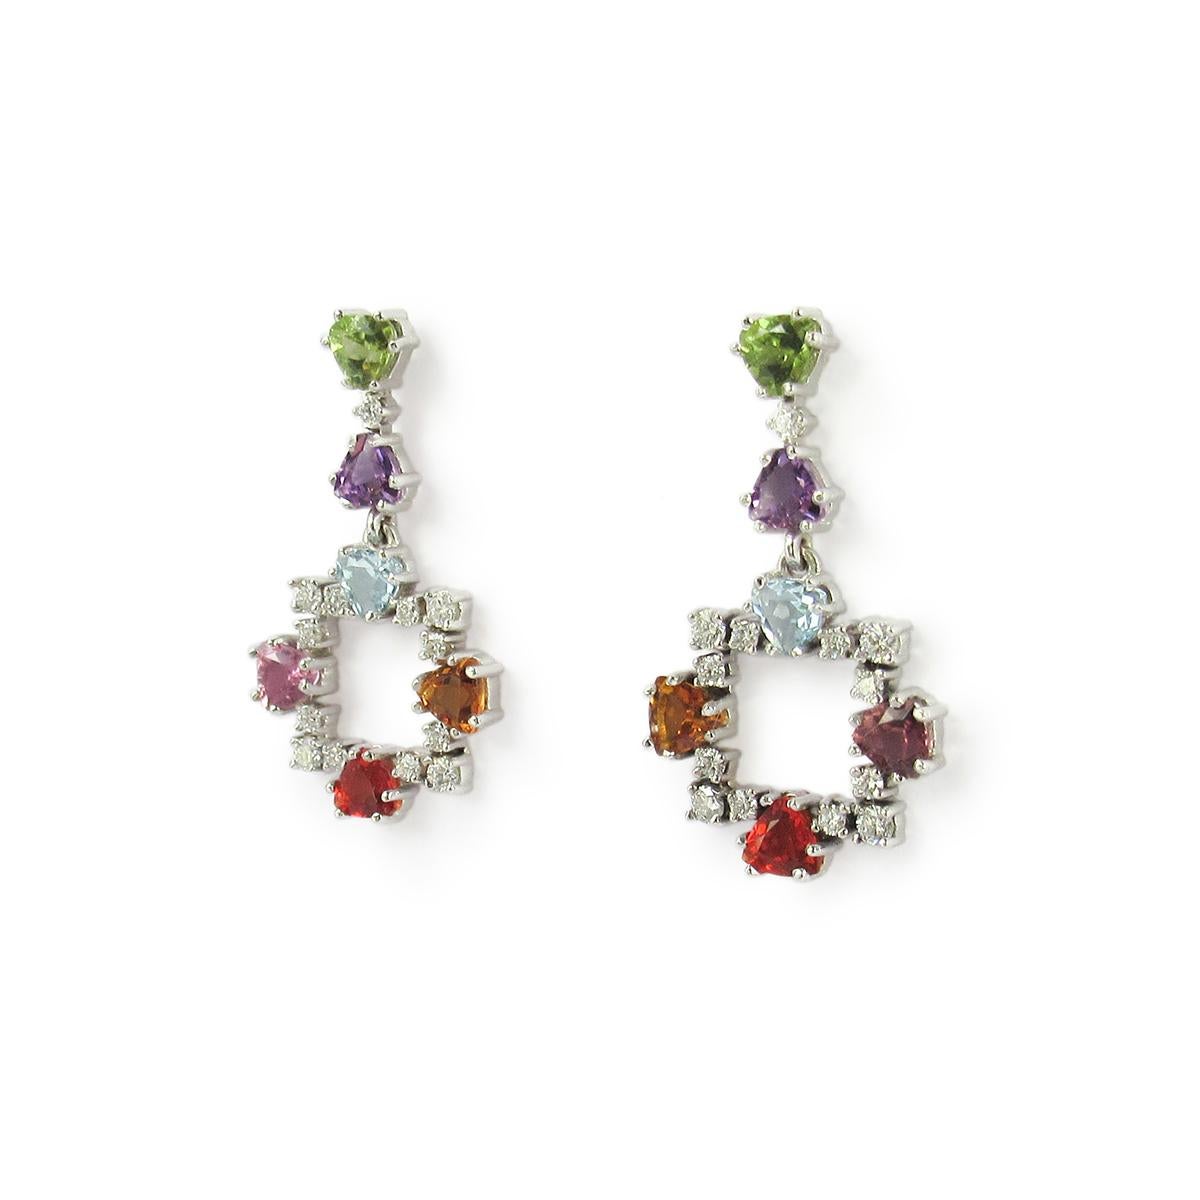 Modernist 14 Karat White Gold Earrings with Diamonds and Multicolored Gemstones For Sale